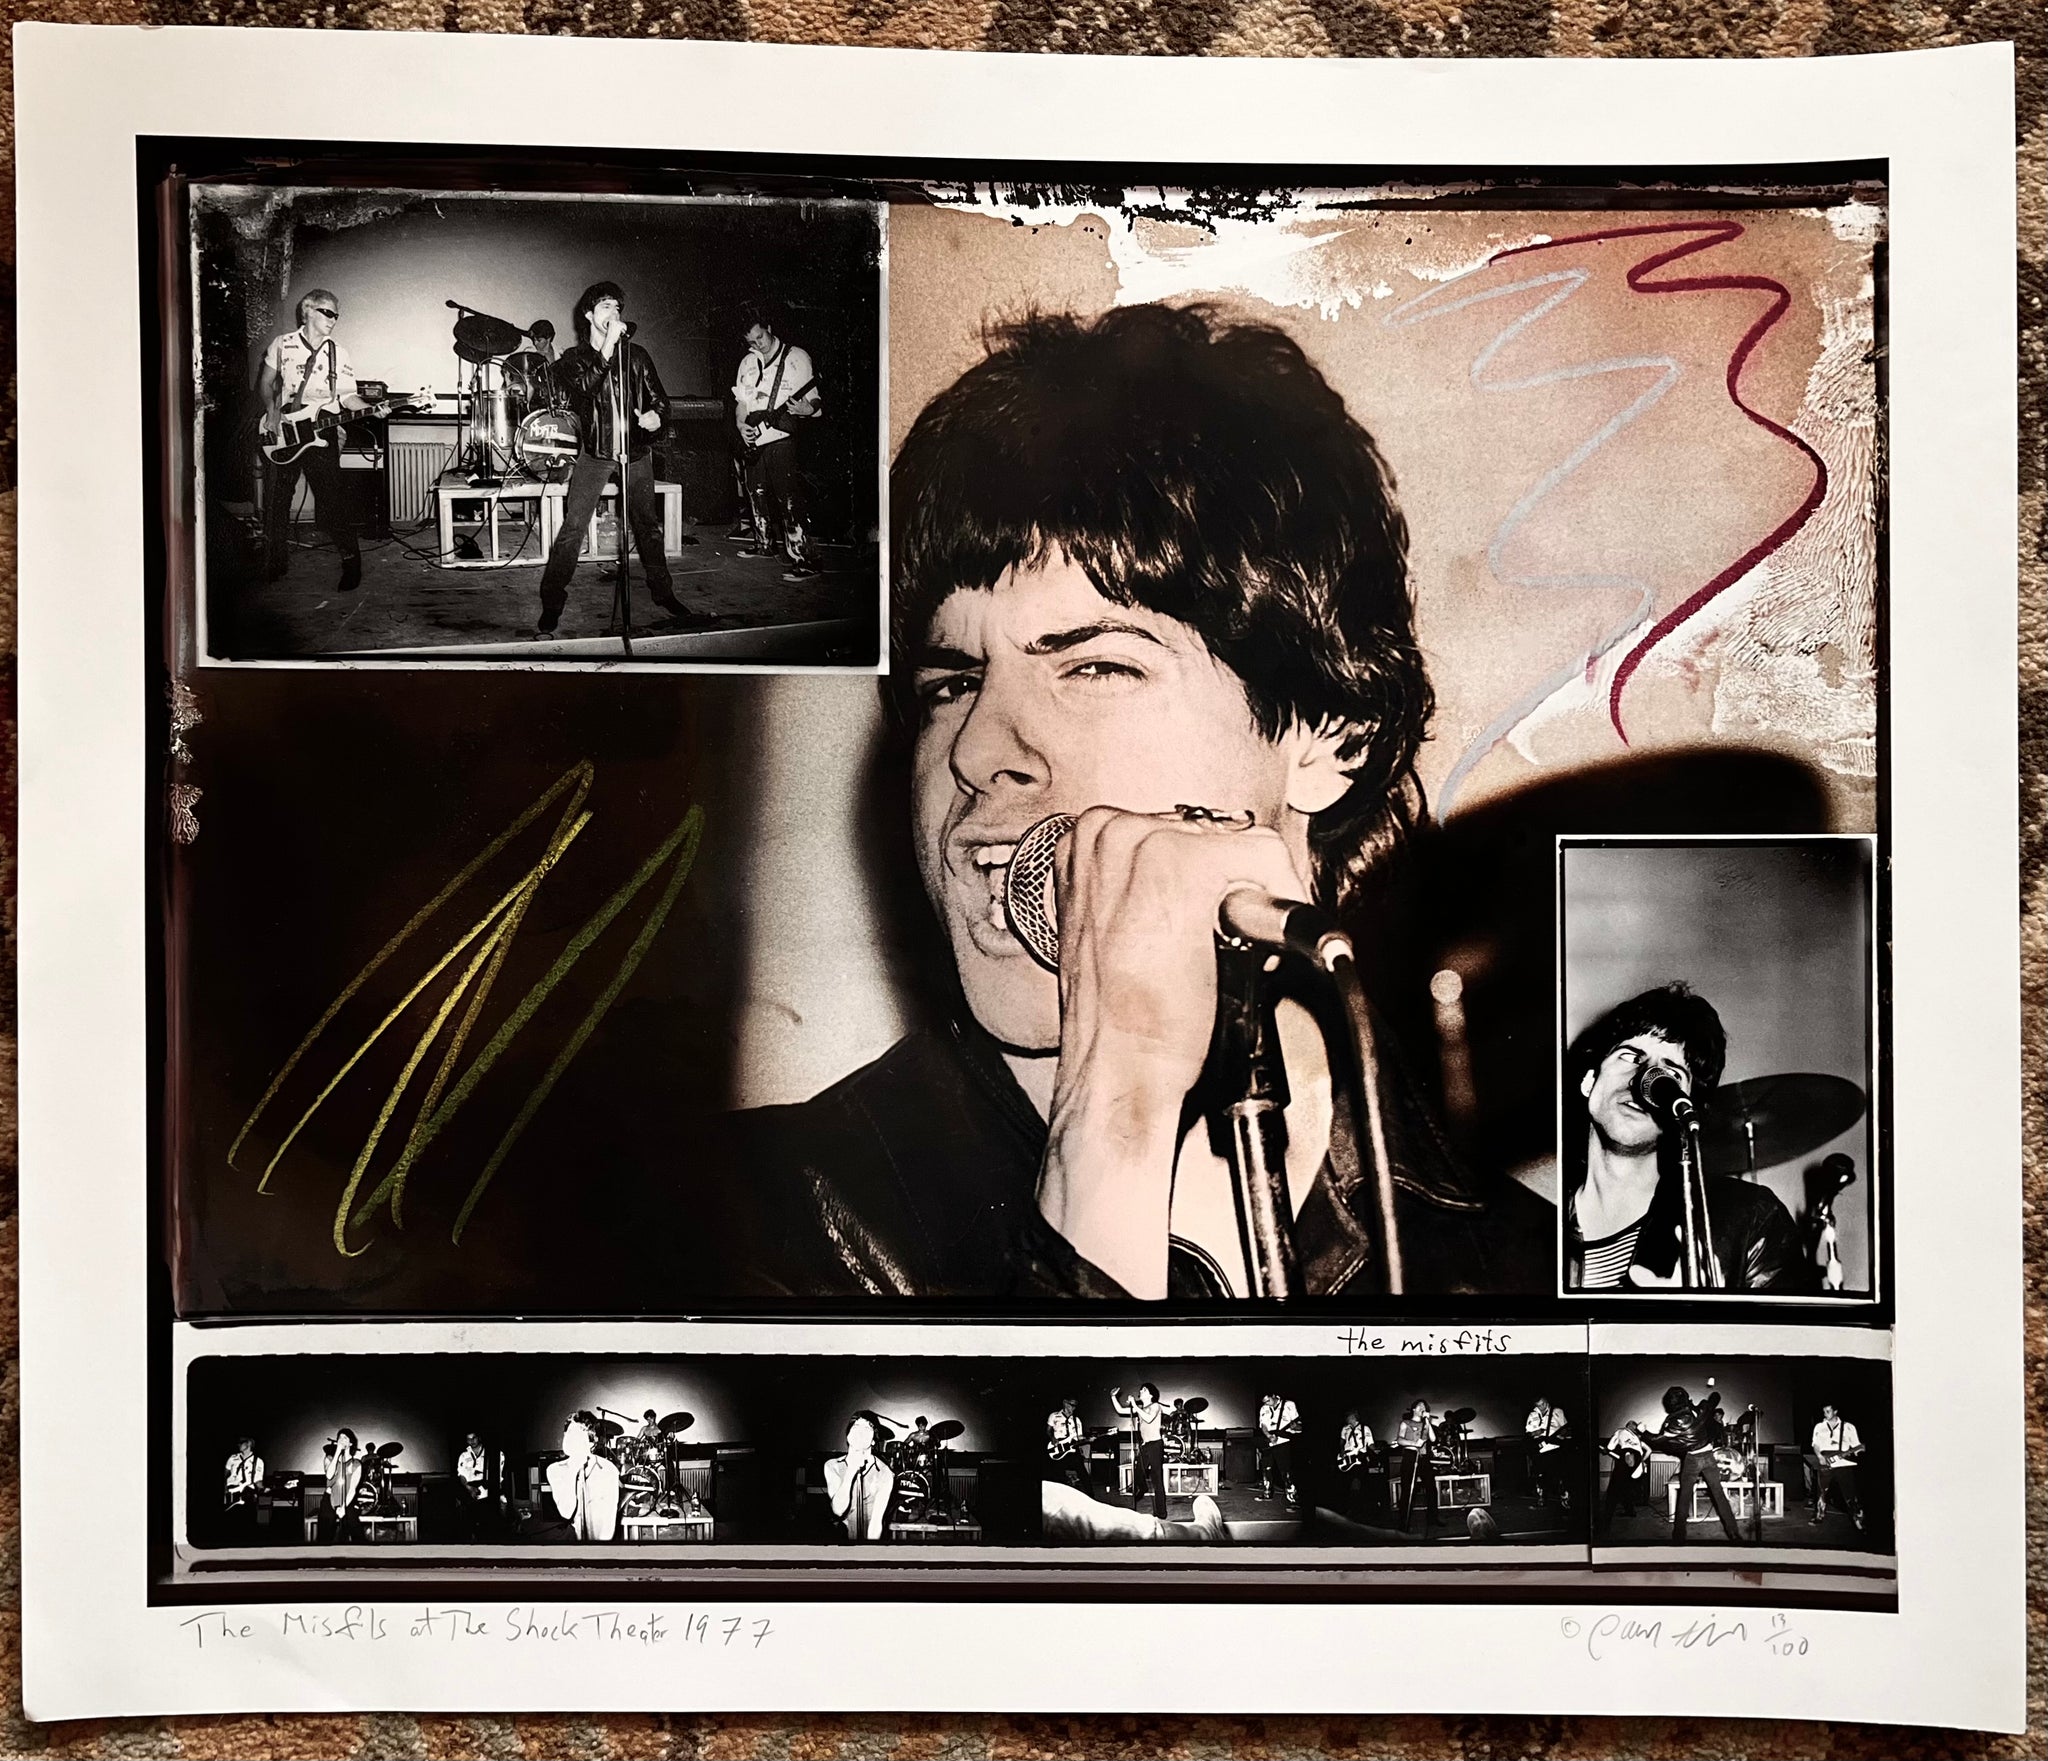 The Misfits at The Shock Theatre 1977. Archival ink jet print of collaged image from the book Every Band That Played The Shock Theatre Except The Dents.